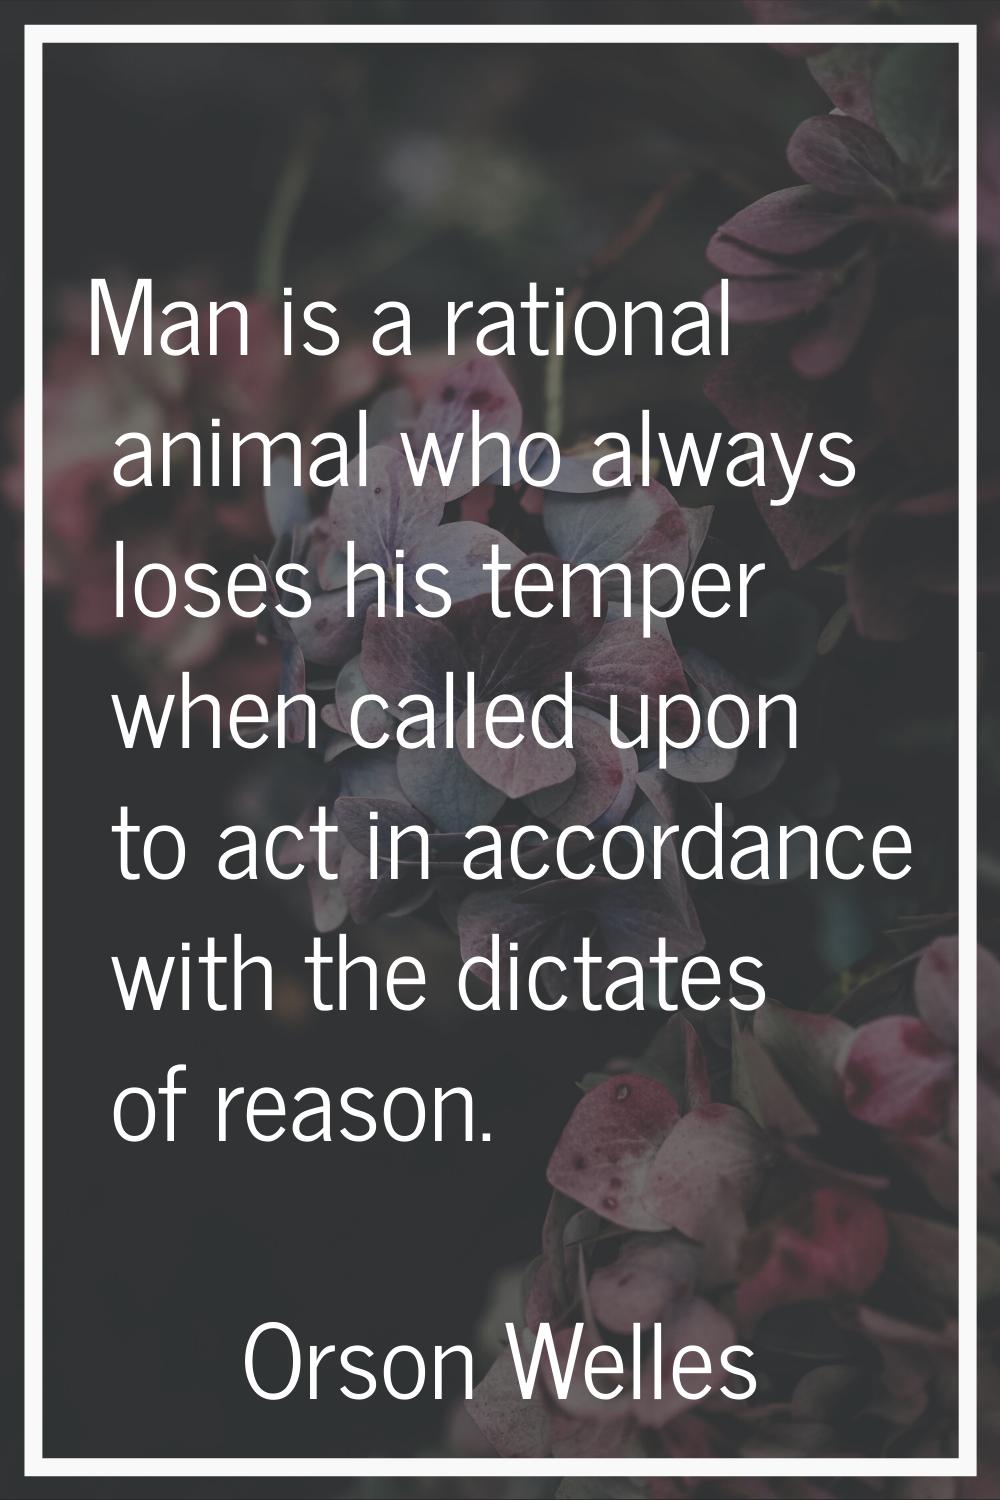 Man is a rational animal who always loses his temper when called upon to act in accordance with the